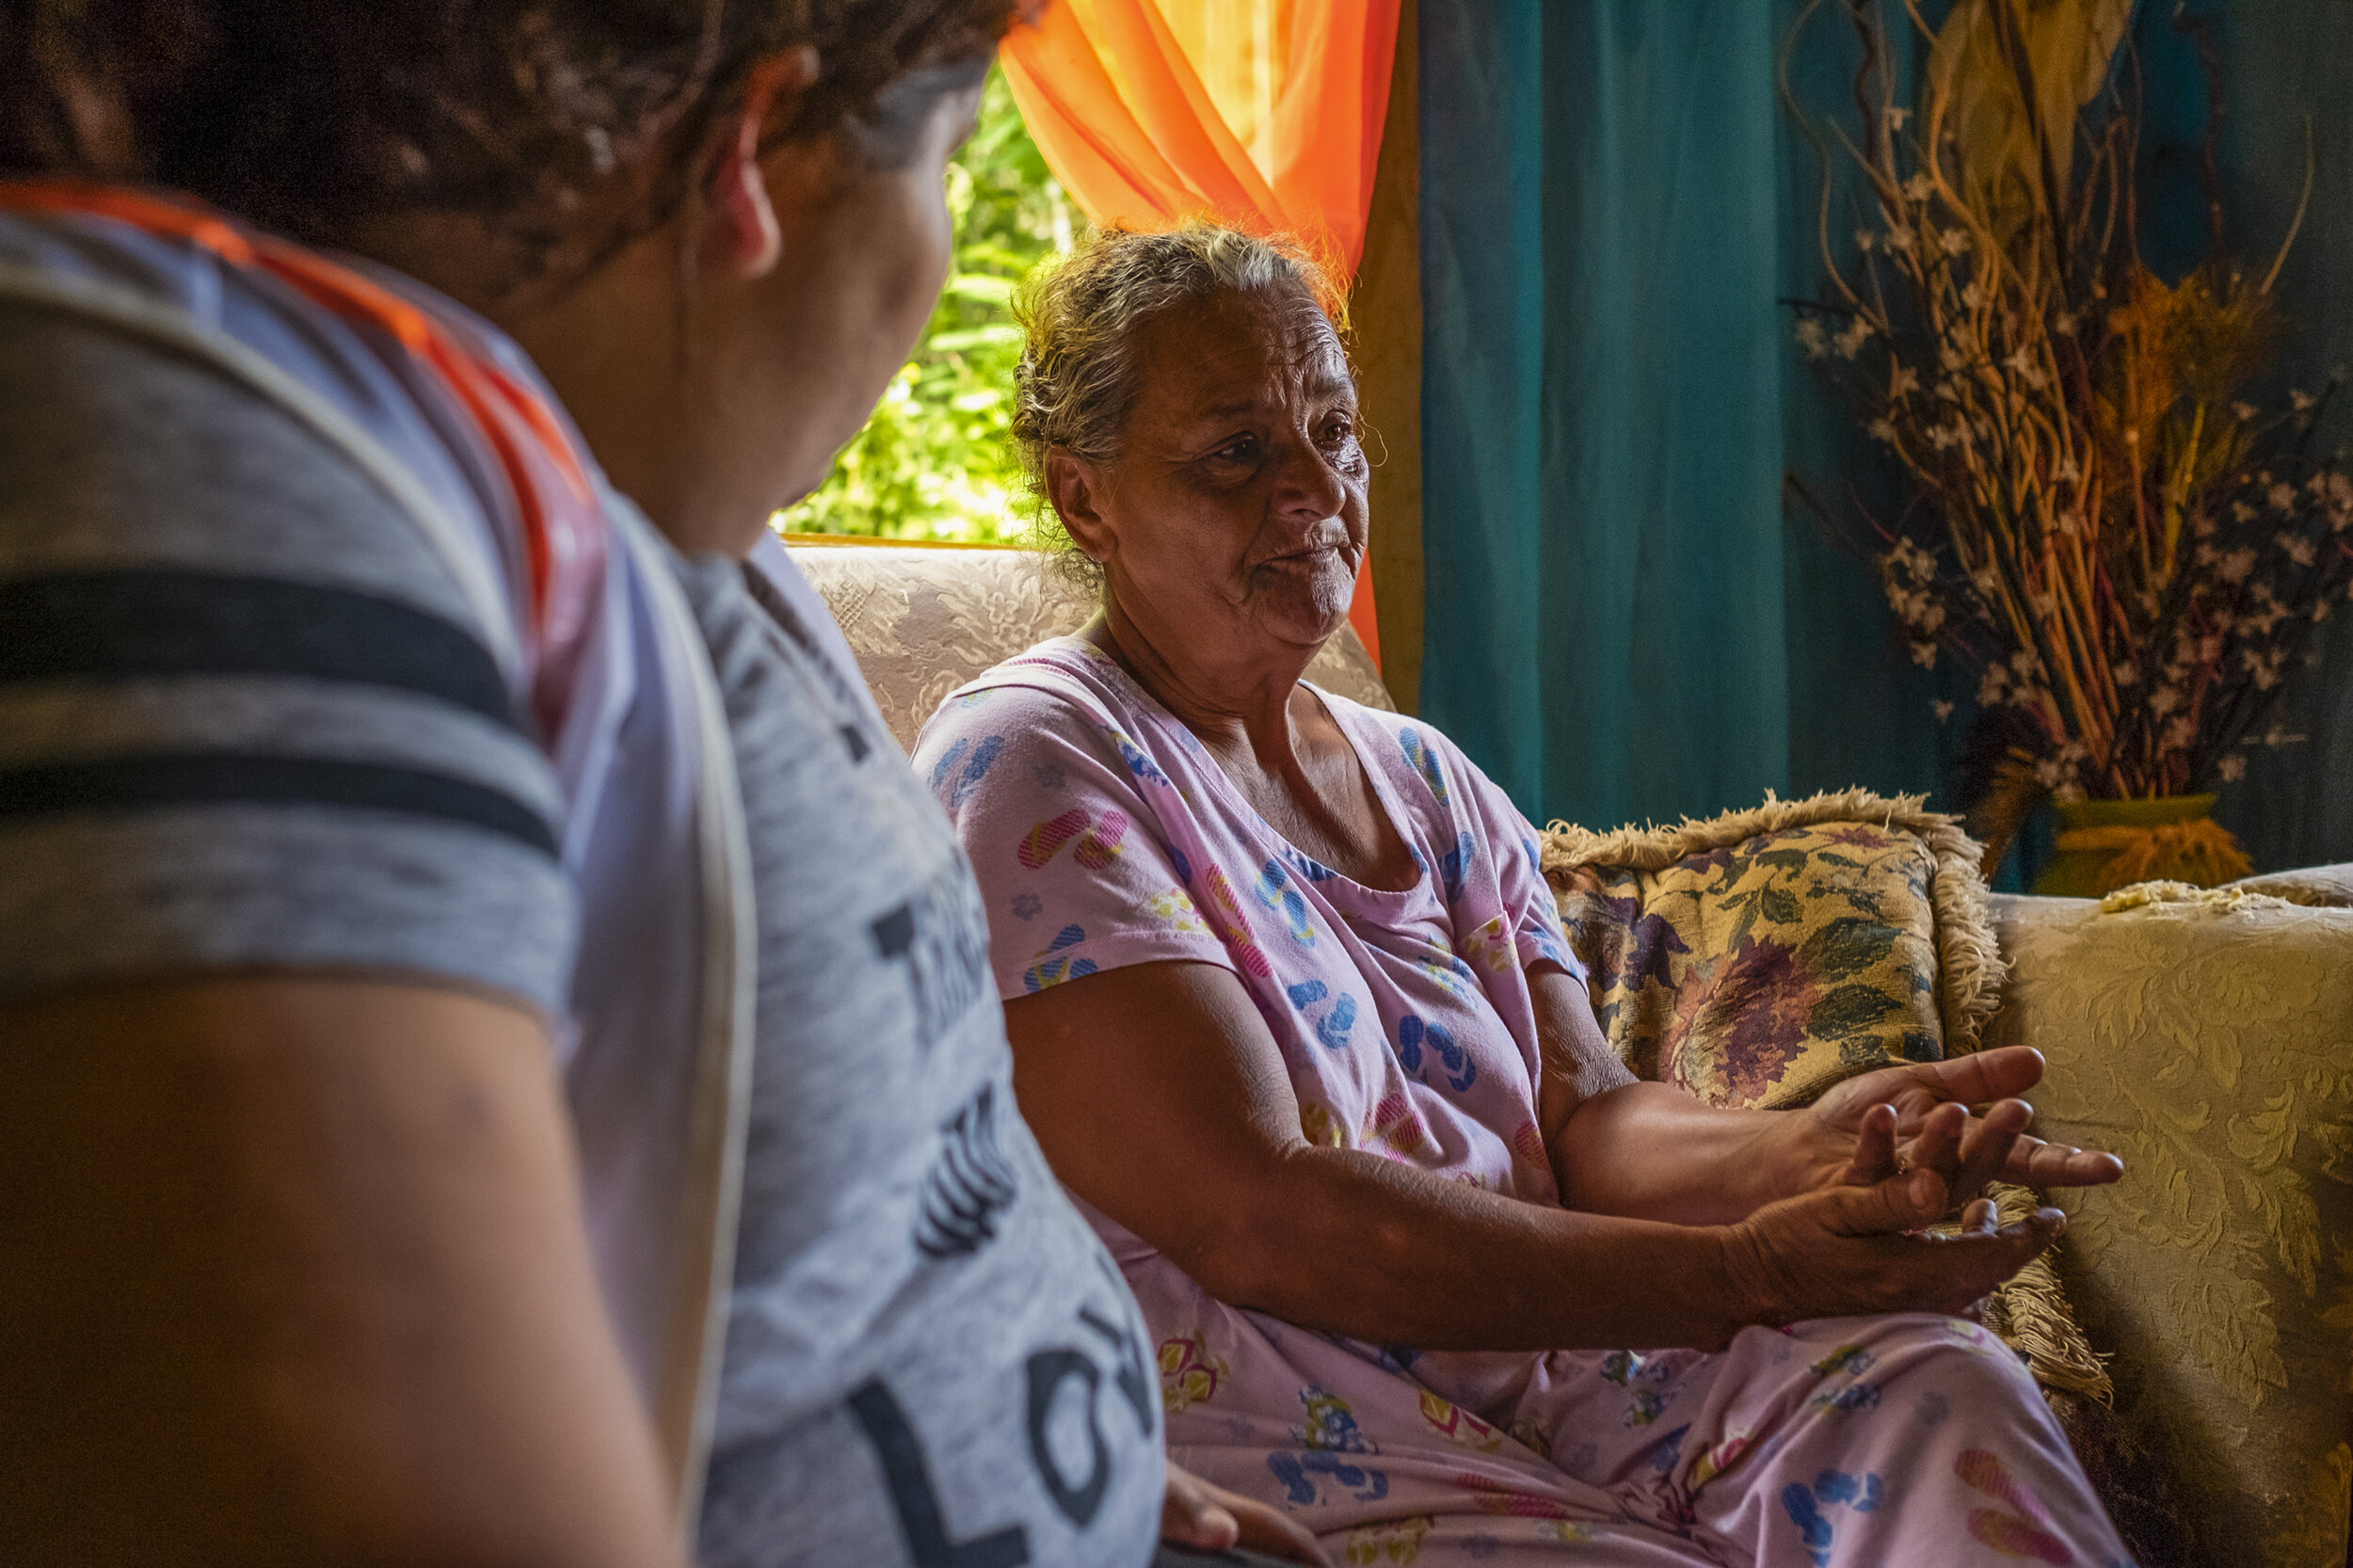  A nurse of Iniciativa de Paz listens to a new patient, Marguerita, explaining how she lost four children in a three-year span to Hurricane Maria, the contraction of meningitis in jail, and a hit and run under investigation.  